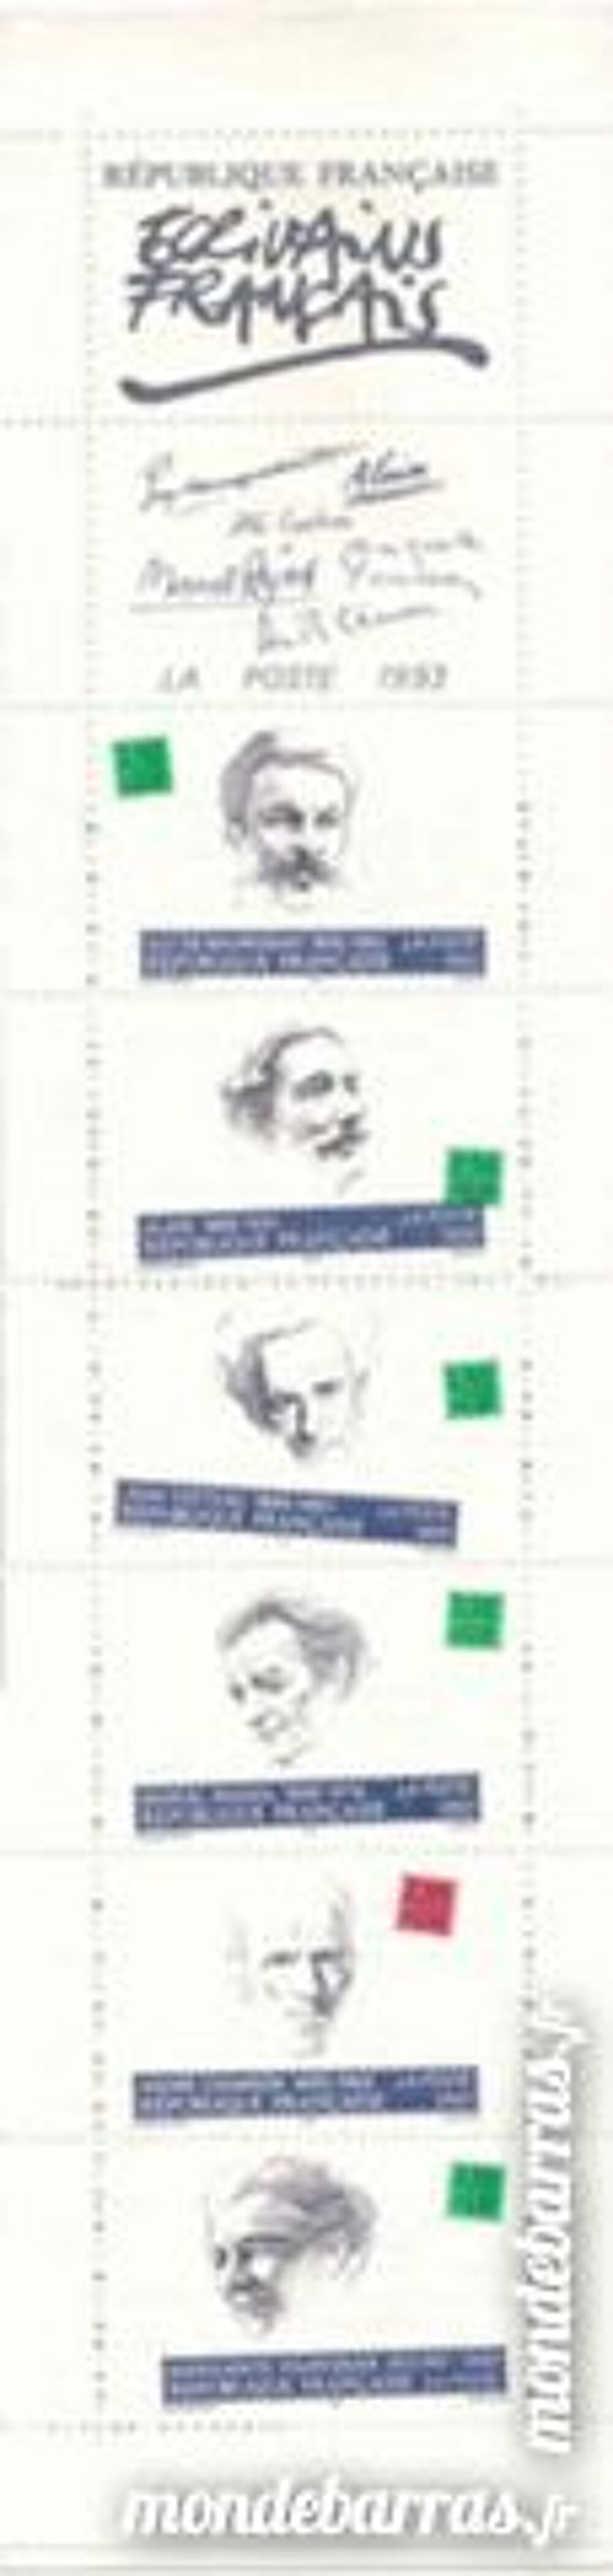 France 1993 Timbres neufs + 04 Carnets 